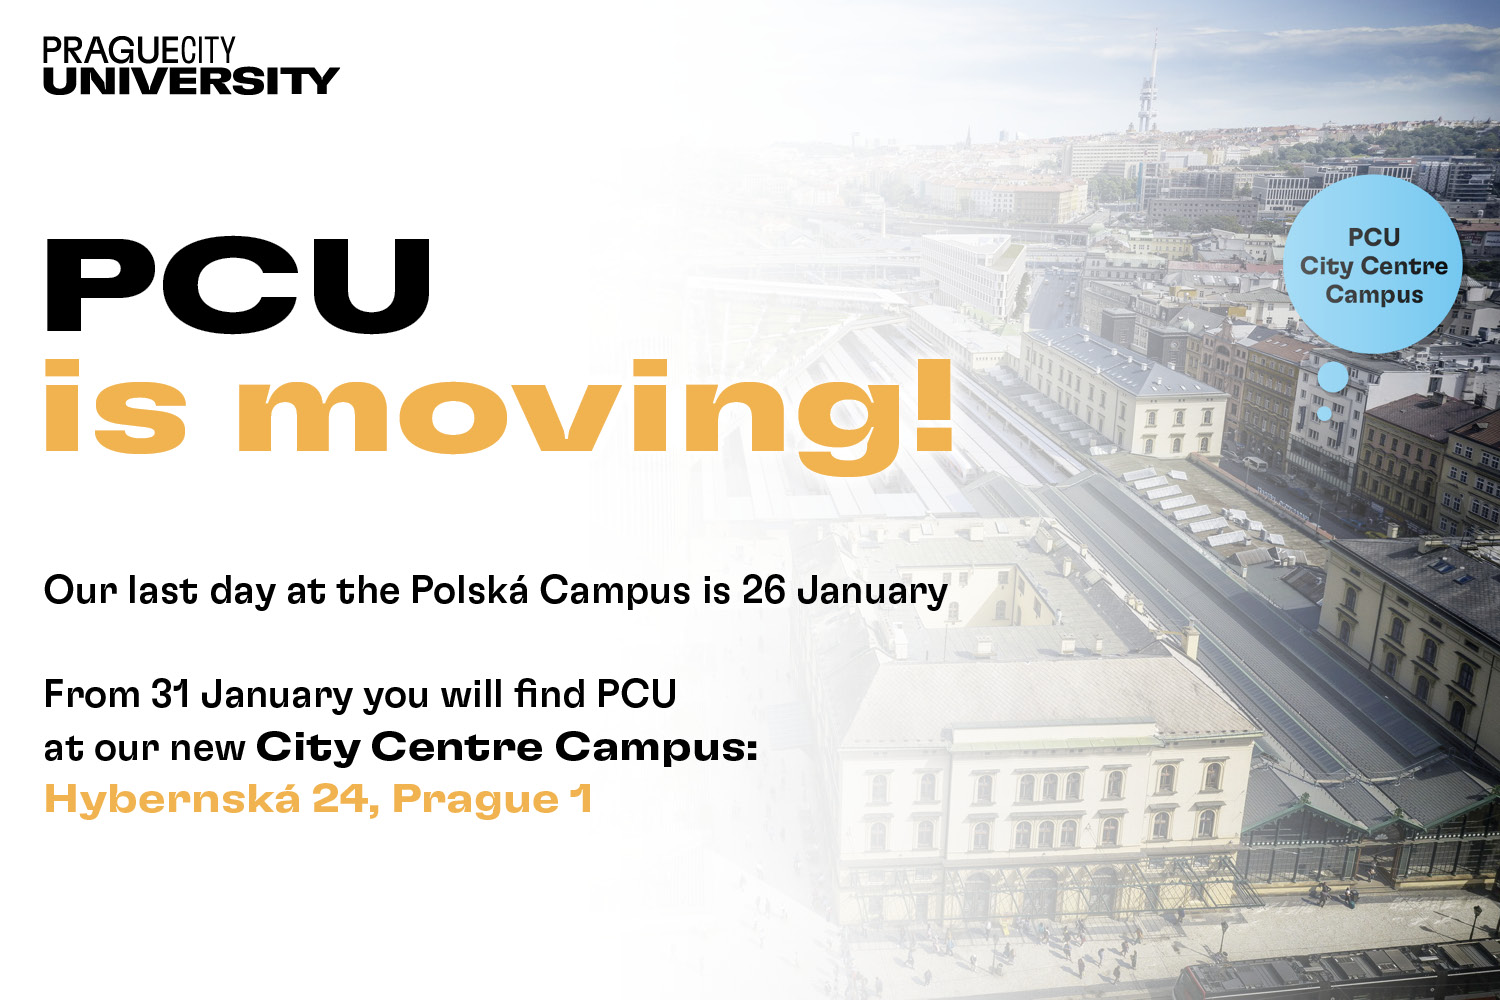 pcu-is-moving-1500x1000px